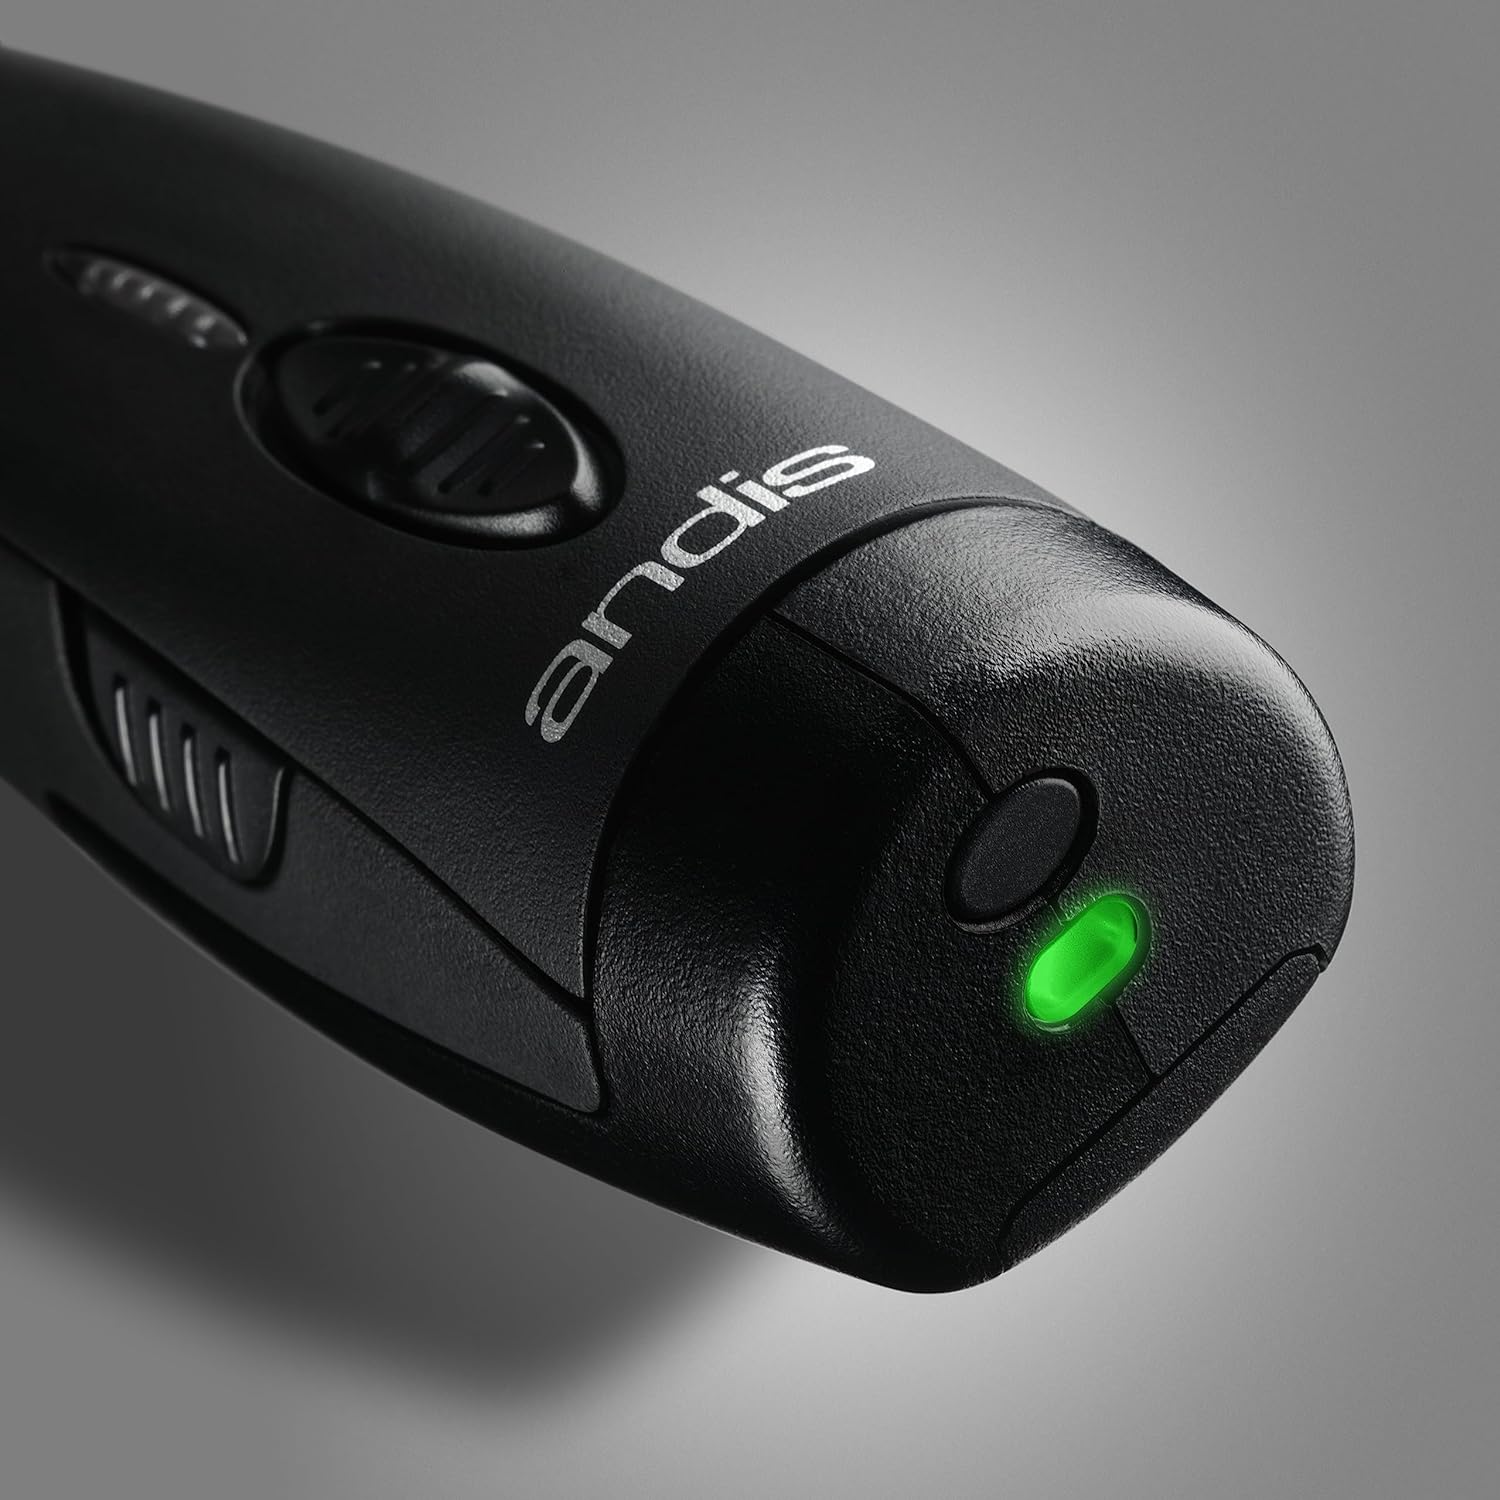 Andis DBLC -2 Pulse ZR II 5-Speed, Detachable Blade Clipper, Cordless, Lithium Ion Battery - Black (Includes extra battery)